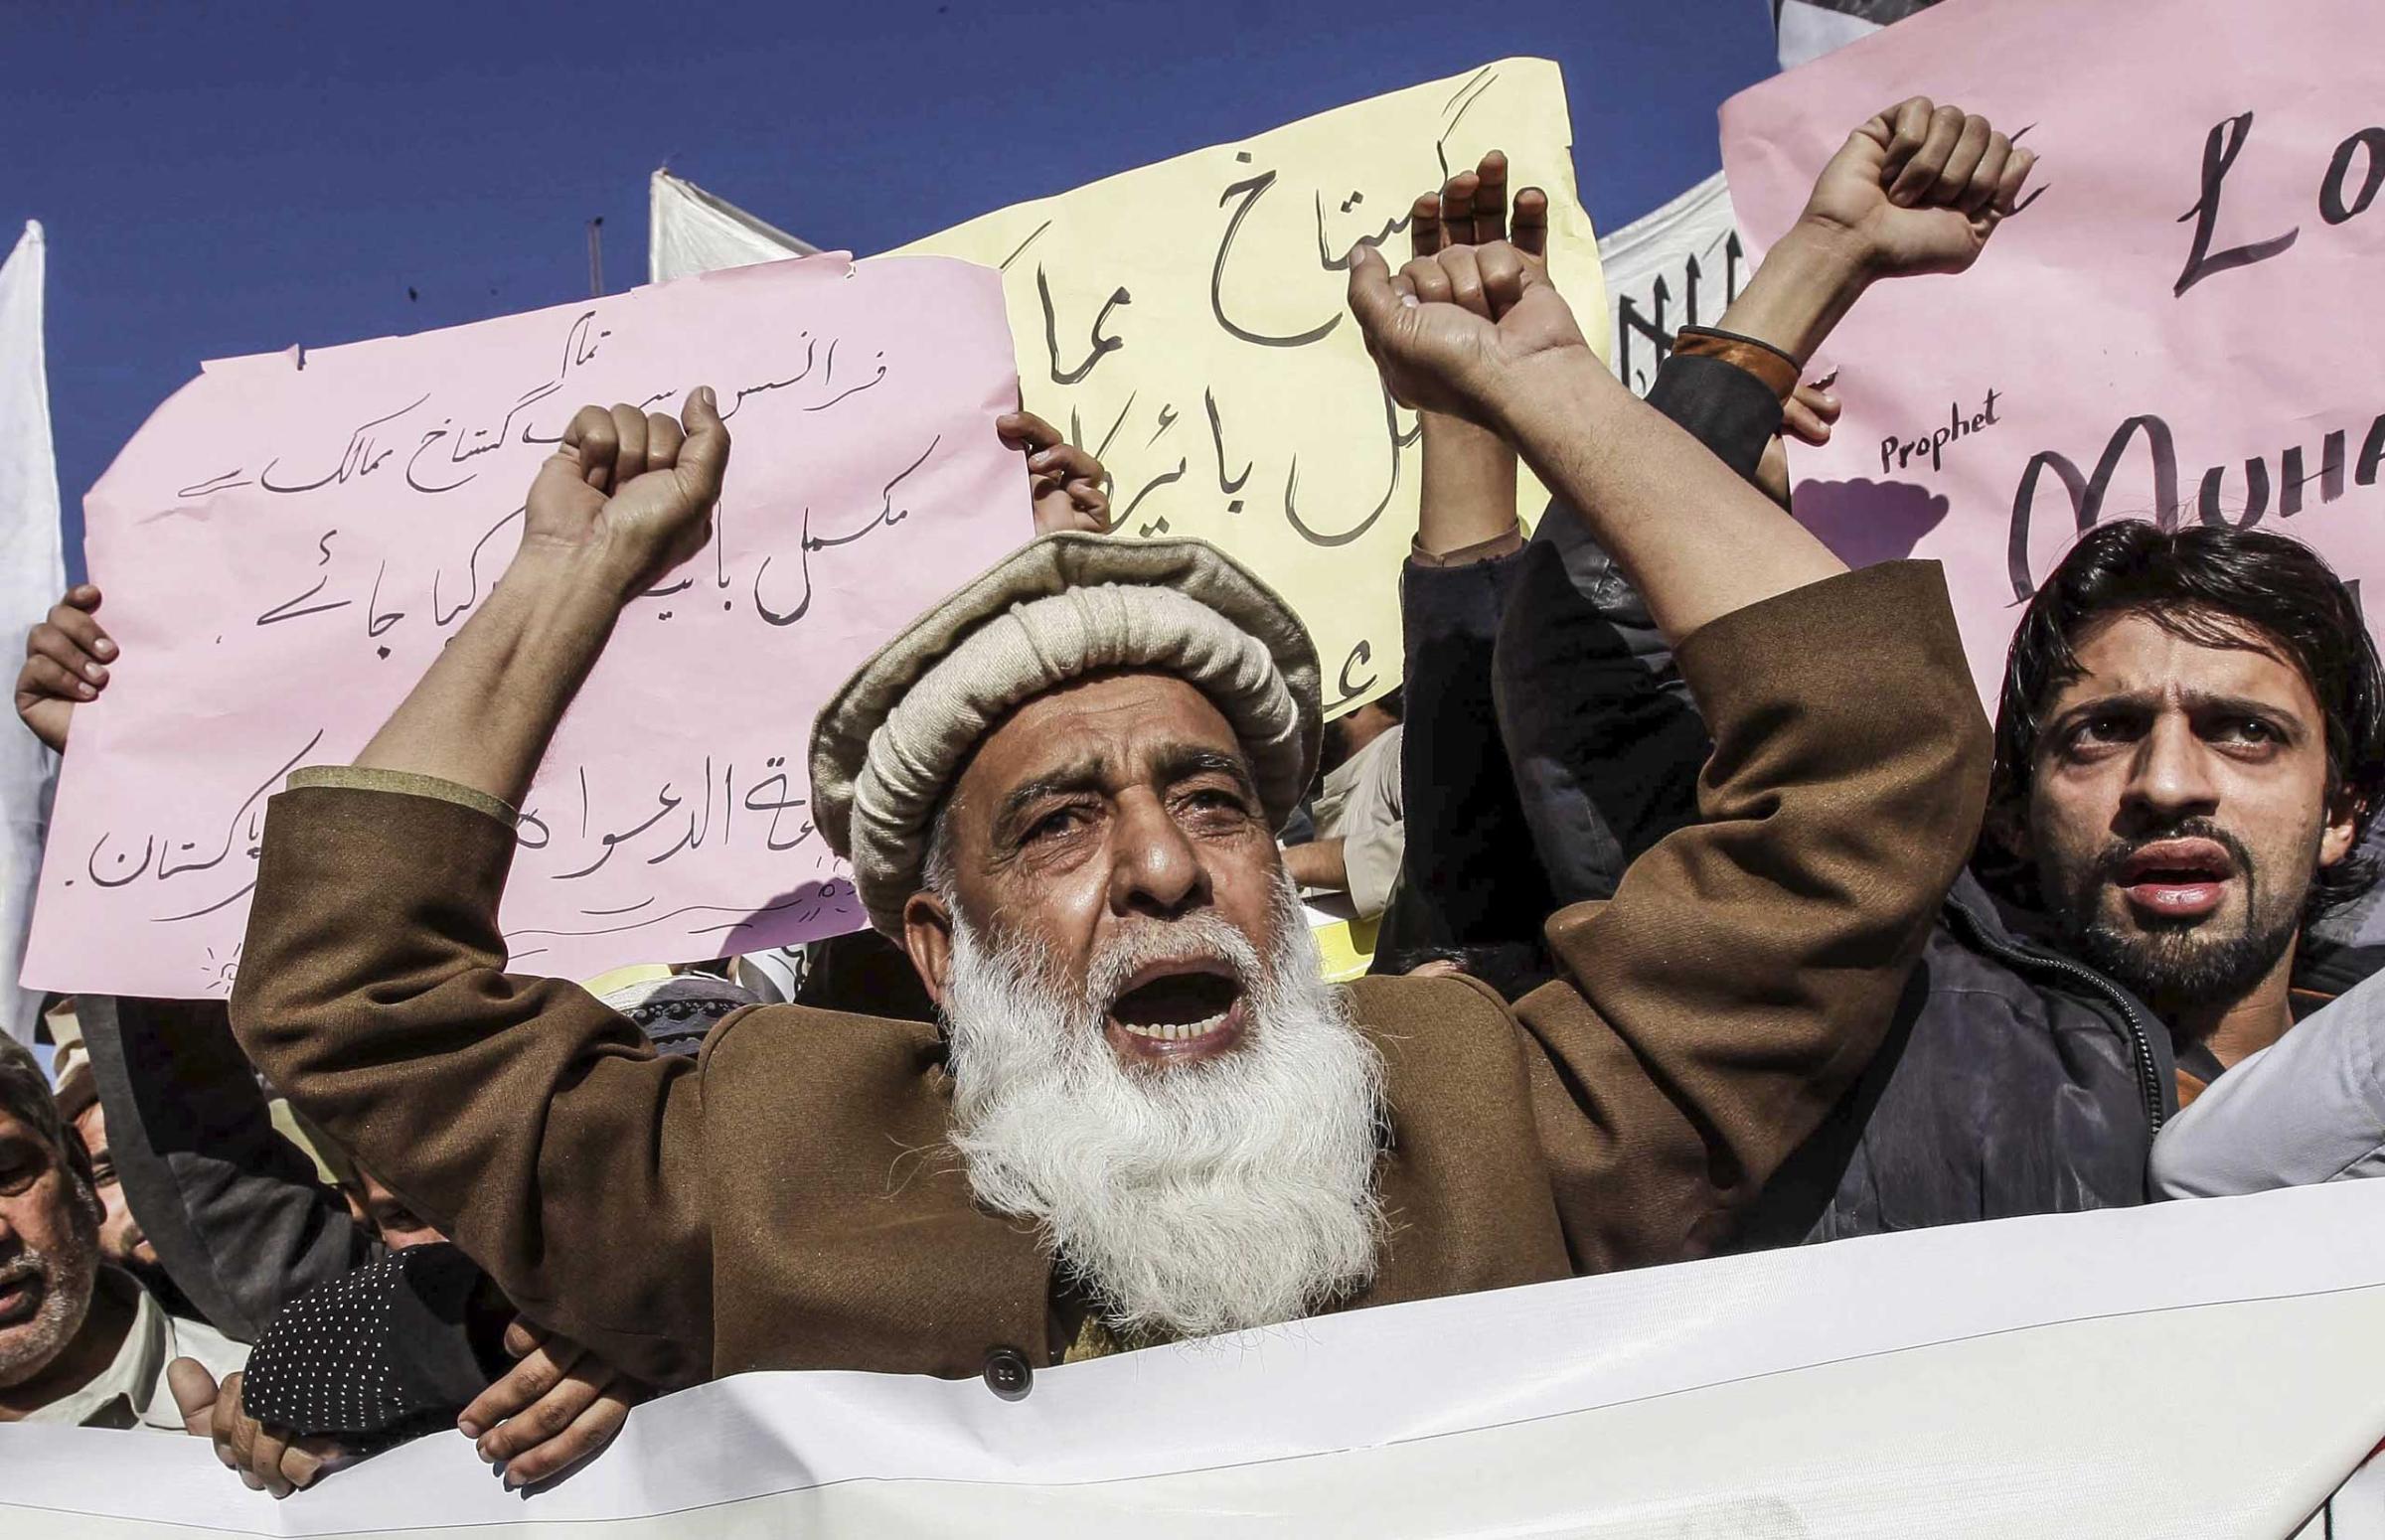 Supporters of banned Islamic charity Jamat-ud-Dawa protest controversial French magazine Charlie Hebdo's decision to publish a depiction of the Prophet Muhammad in Peshawar, Pakistan on Jan. 16, 2015.